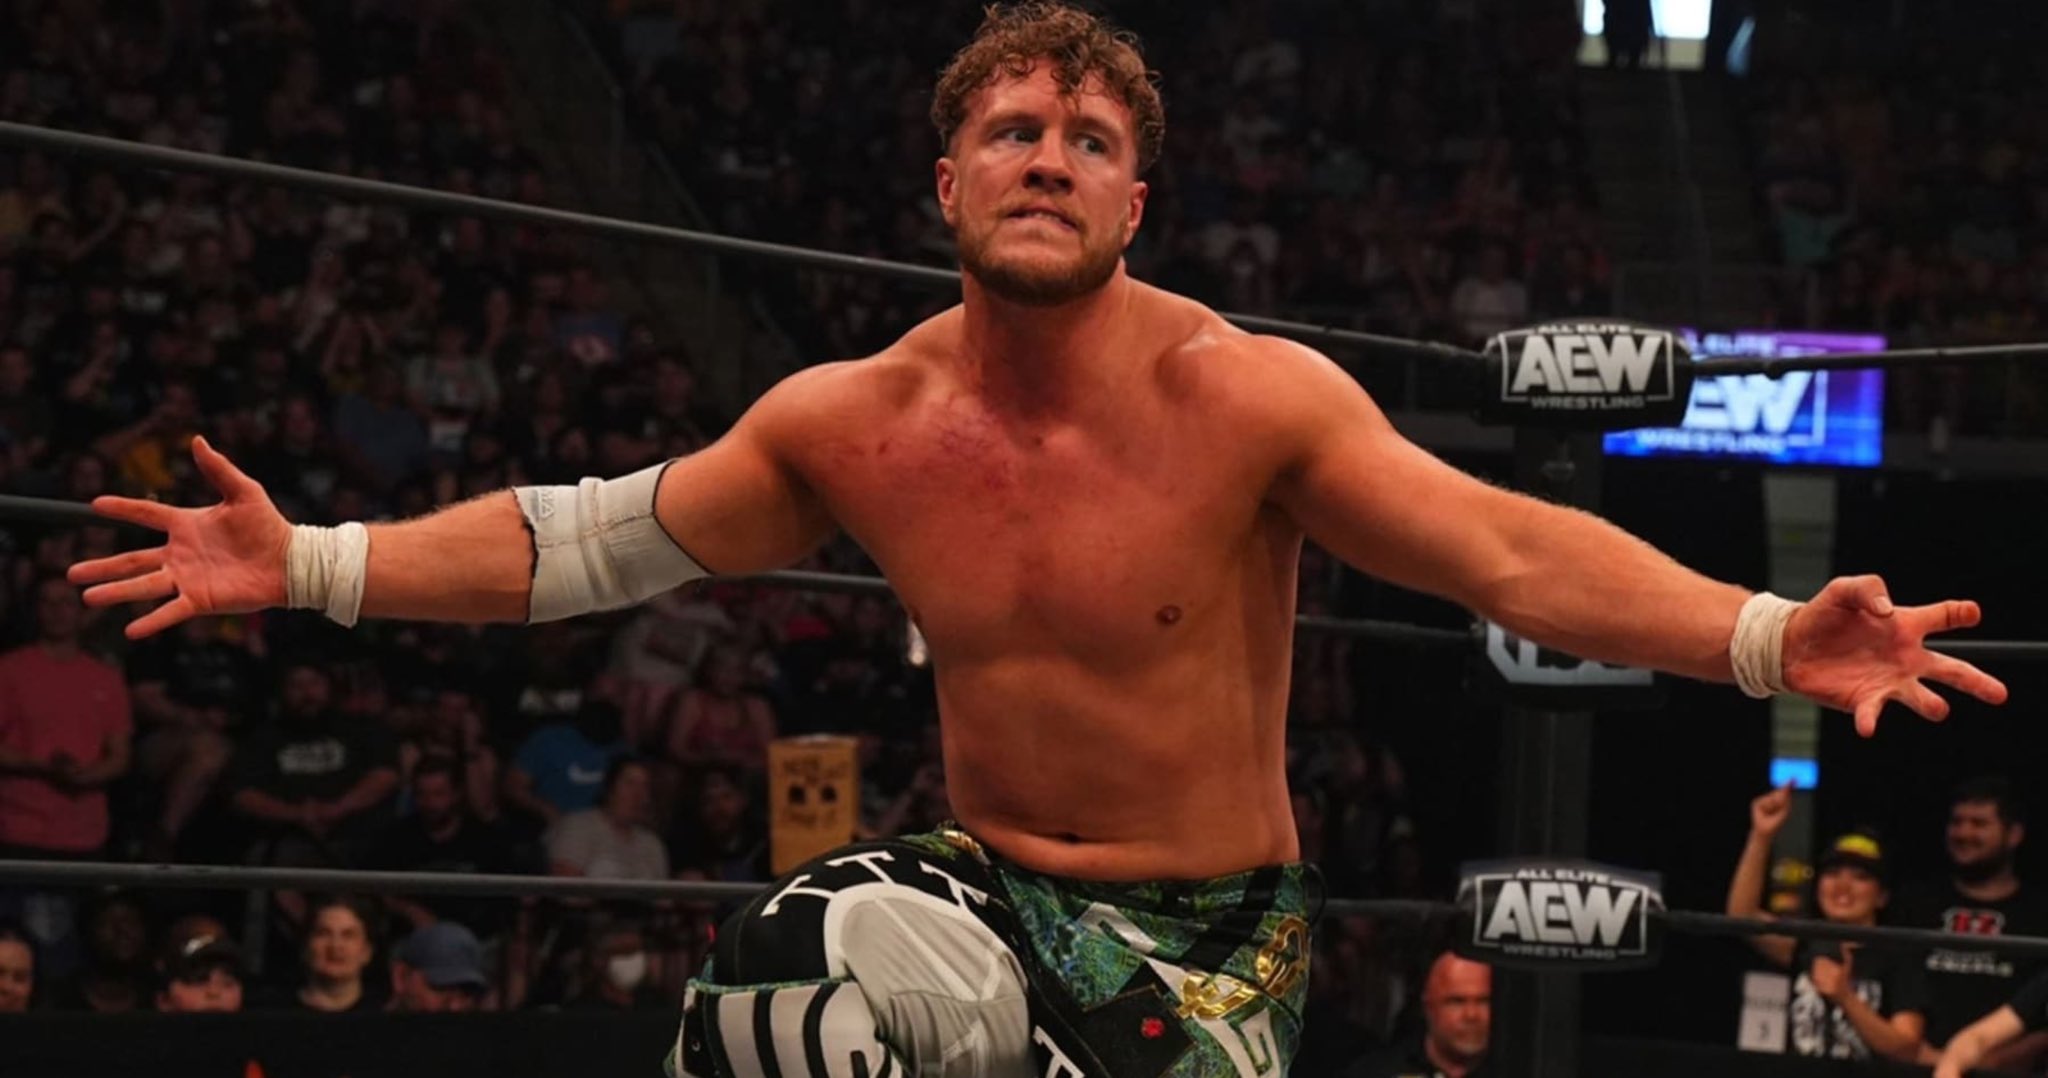 Elevating: The Risks and Rewards of AEW Pushing Will Ospreay to the Sky